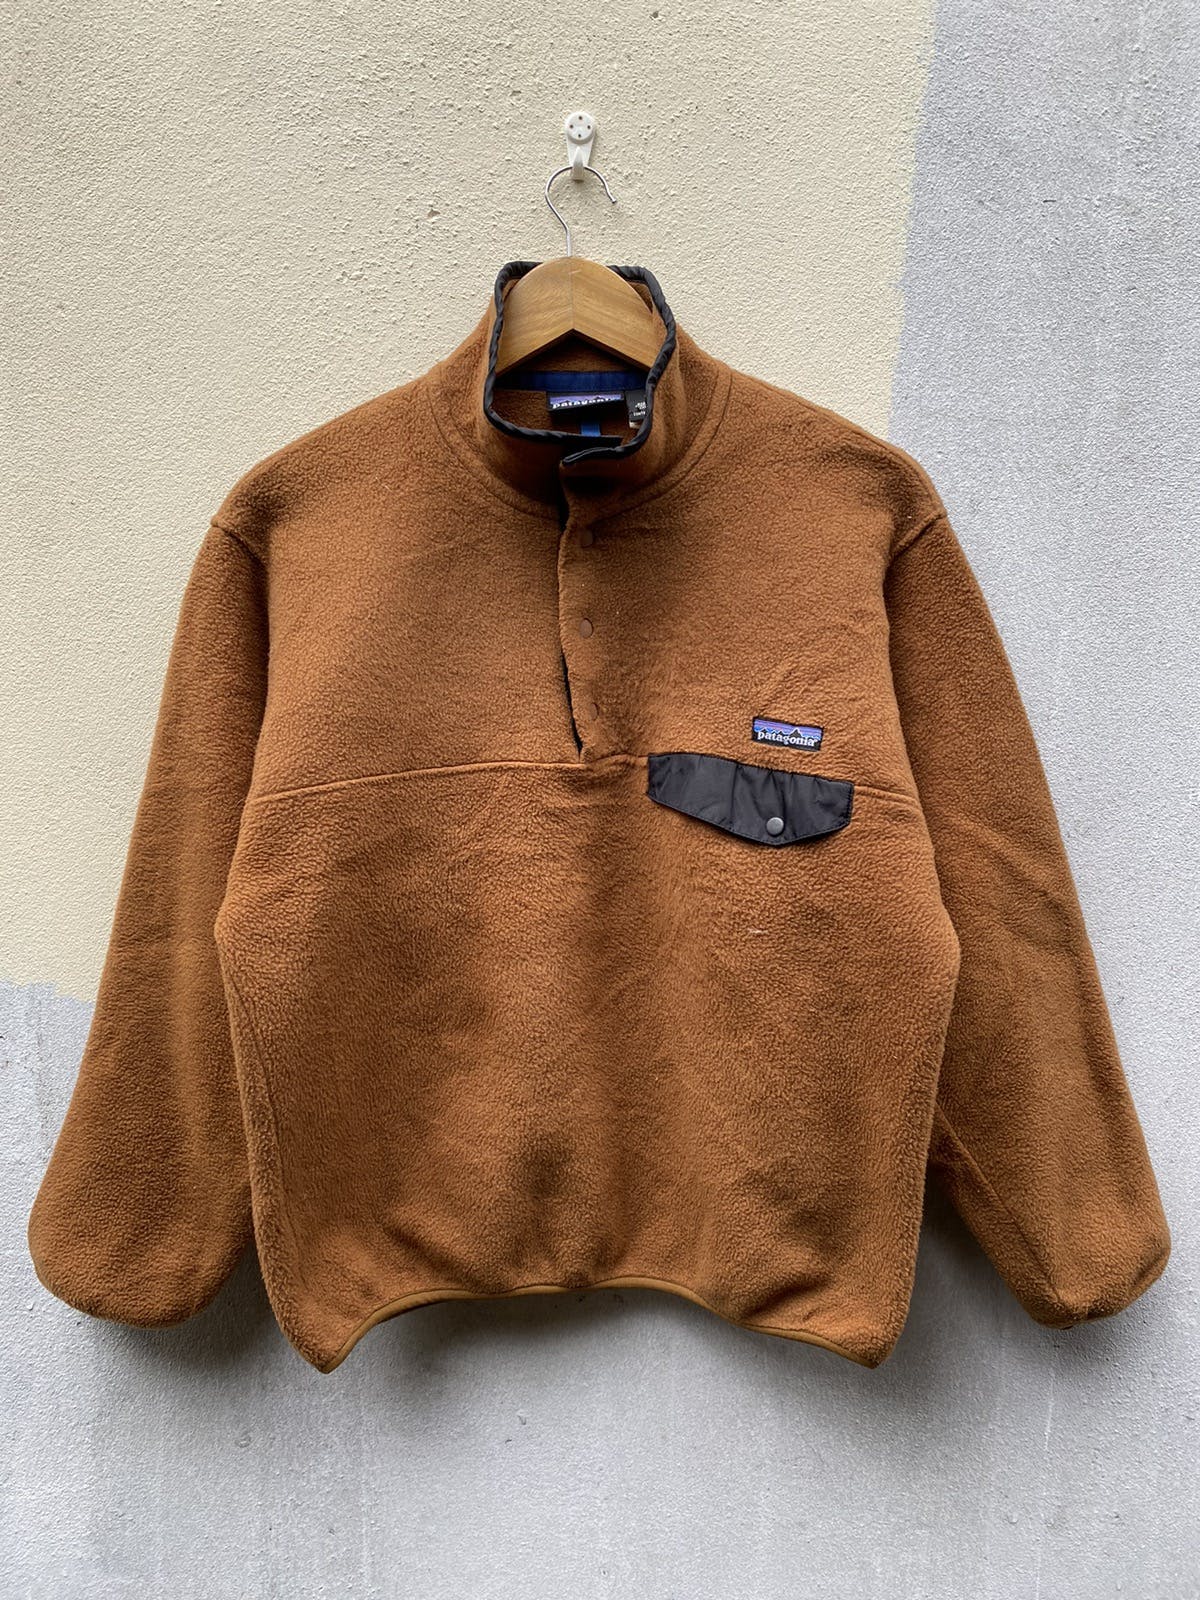 Patagonia Snap-T Fleece Brow Sweaters - 1